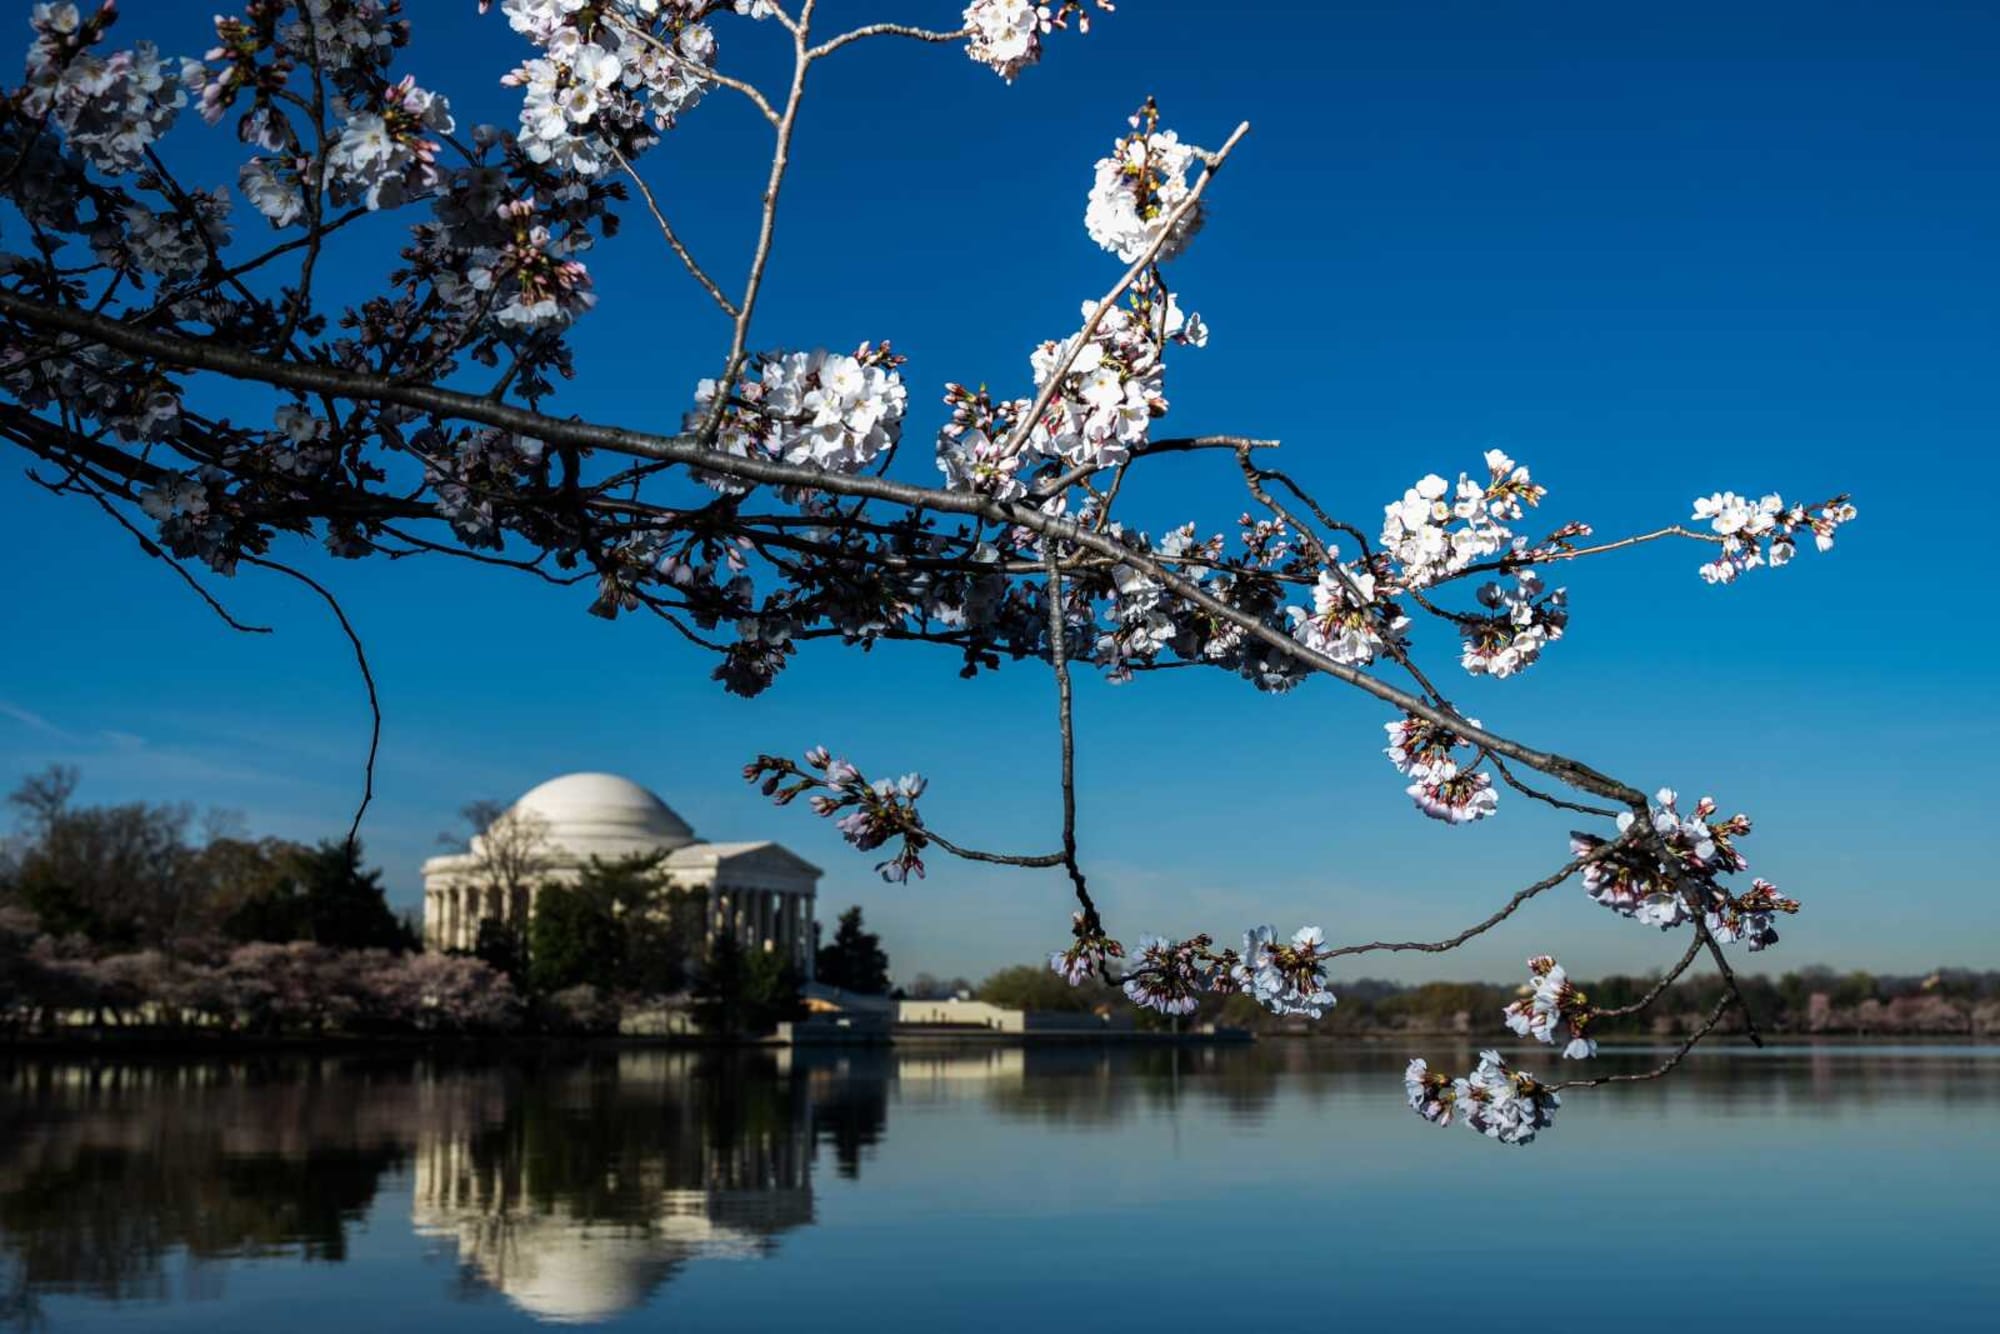 Washington Capitals announce first cherry blossoms jersey